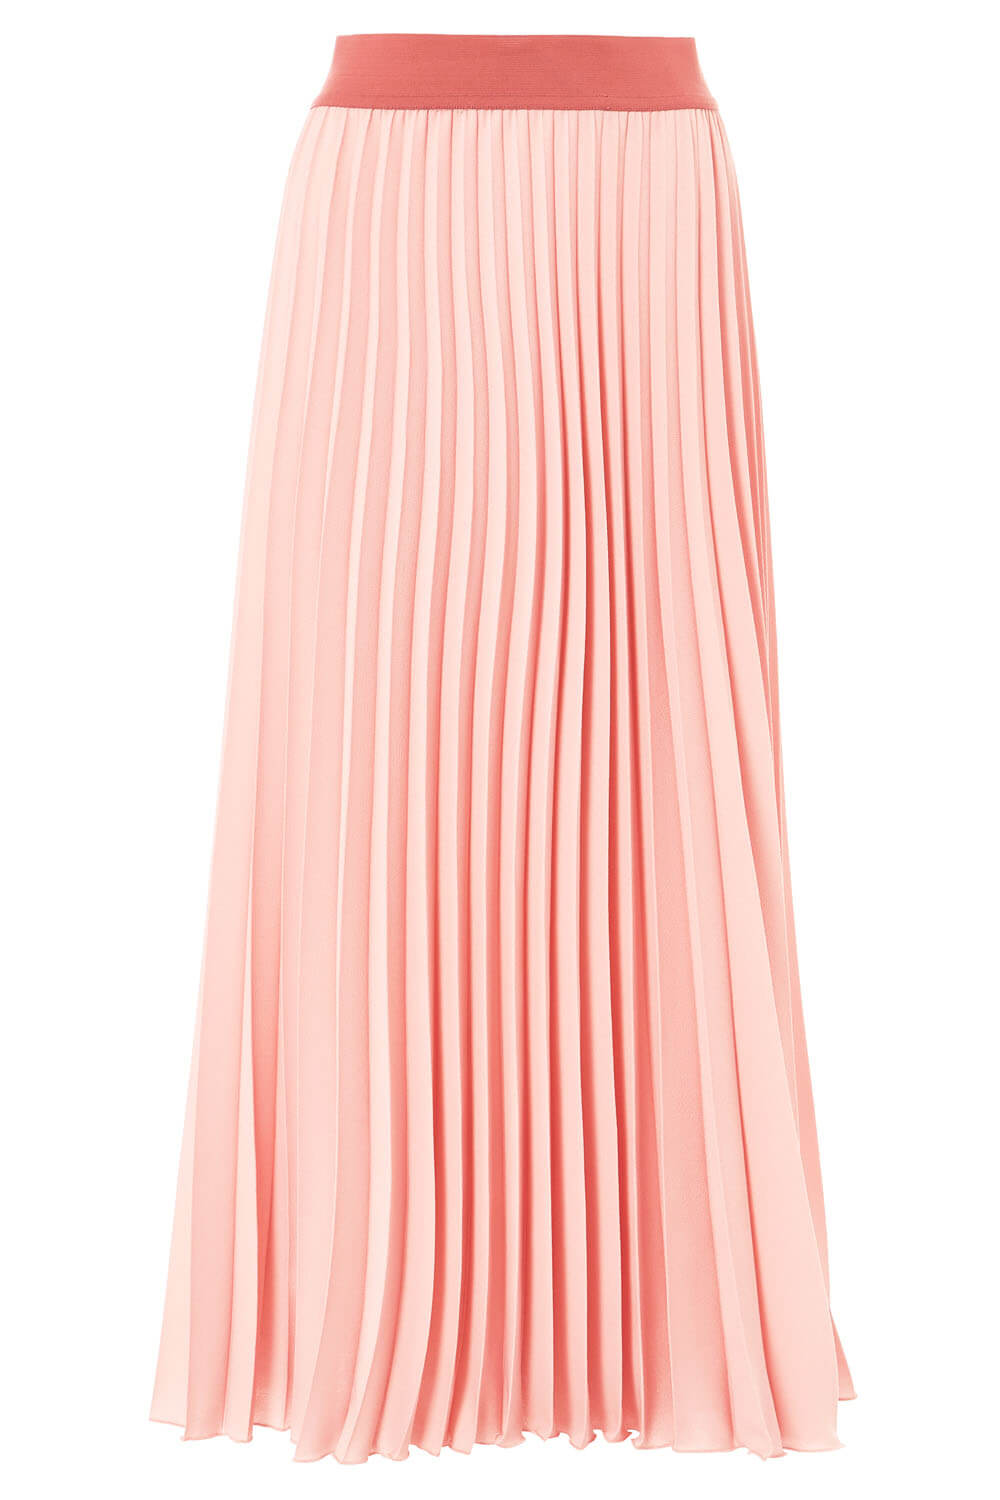 Light Pink Contrast Band Pleated Maxi Skirt, Image 5 of 5